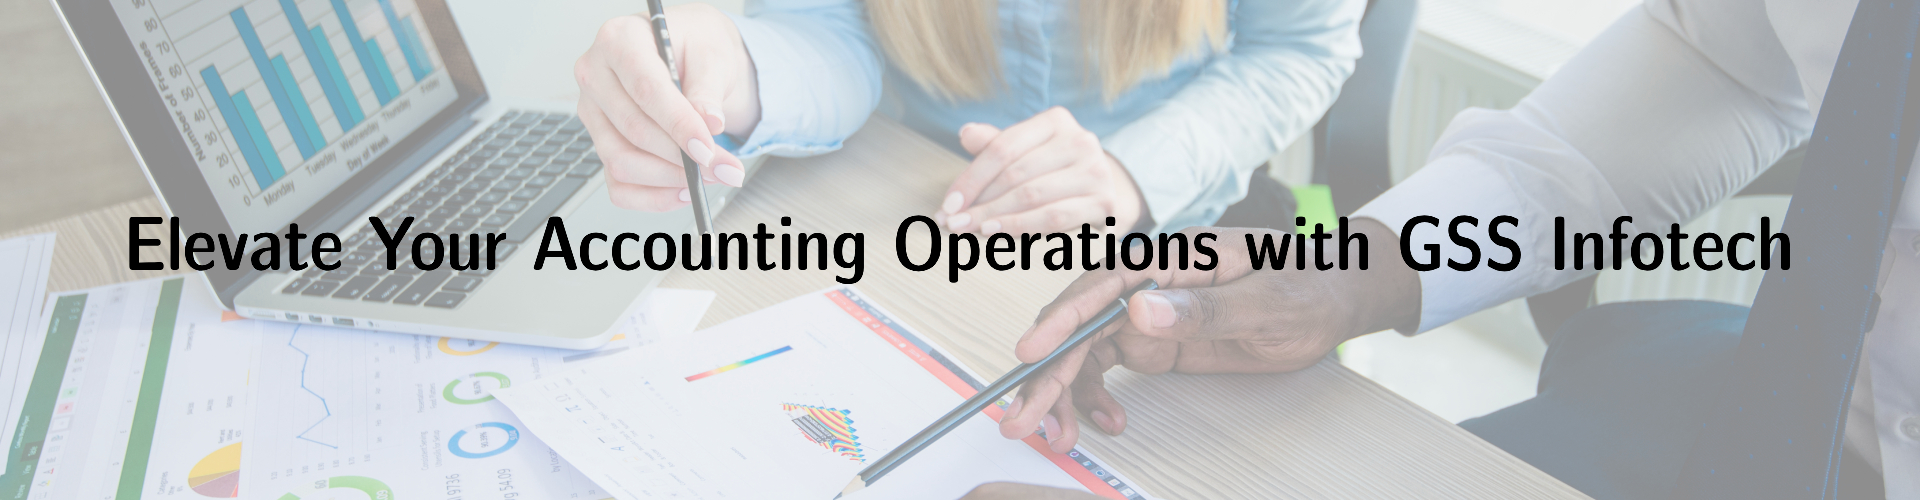 Elevate Your Accounting Operations with GSS Infotech